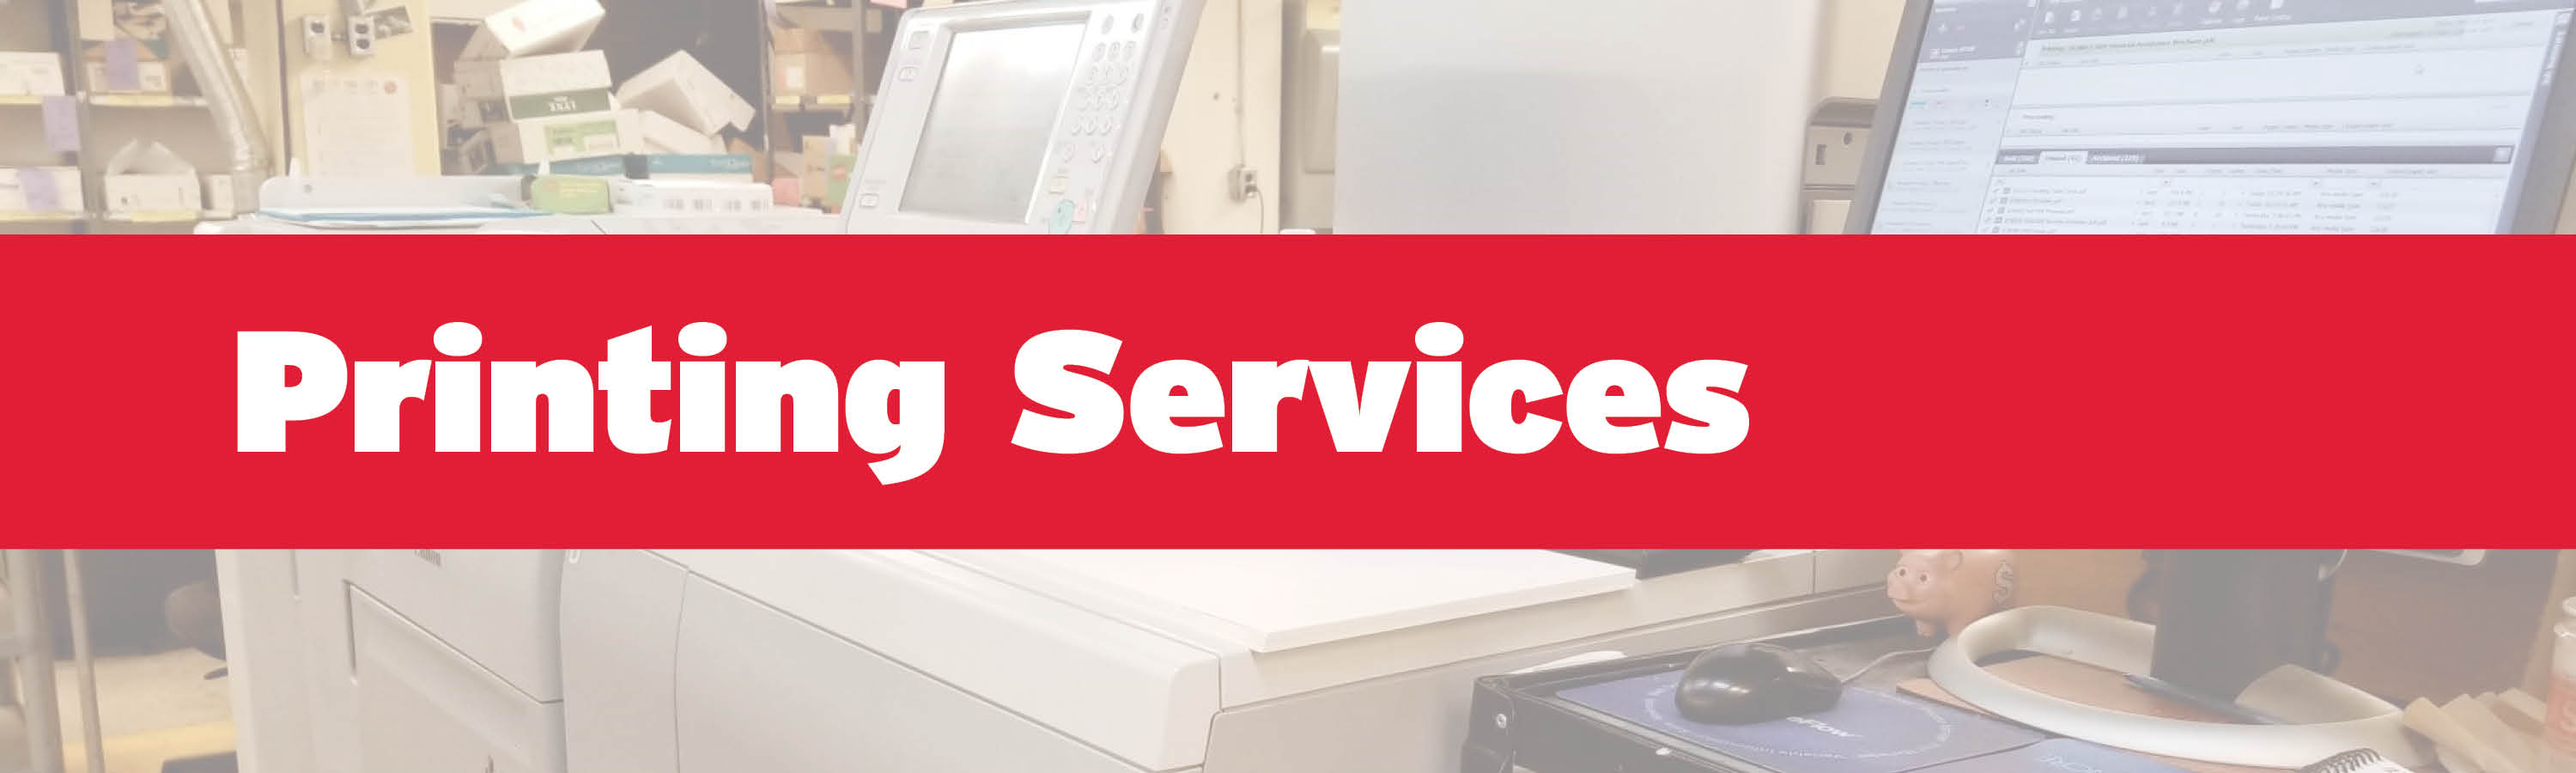 Printing Services | Campus Services & Business Operations